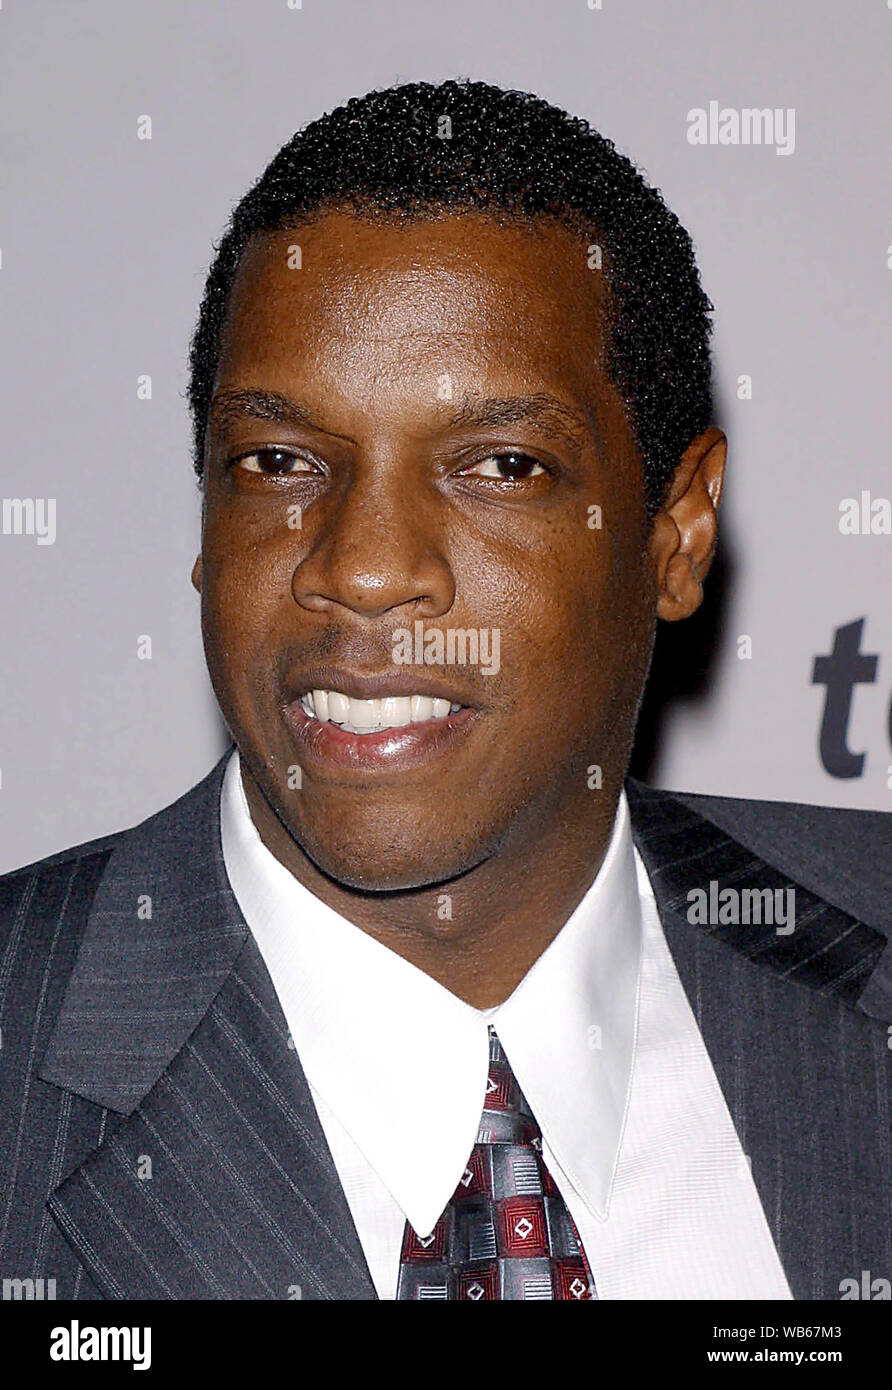 File:Dwight Gooden (5554538741) (cropped).jpg - Wikimedia Commons